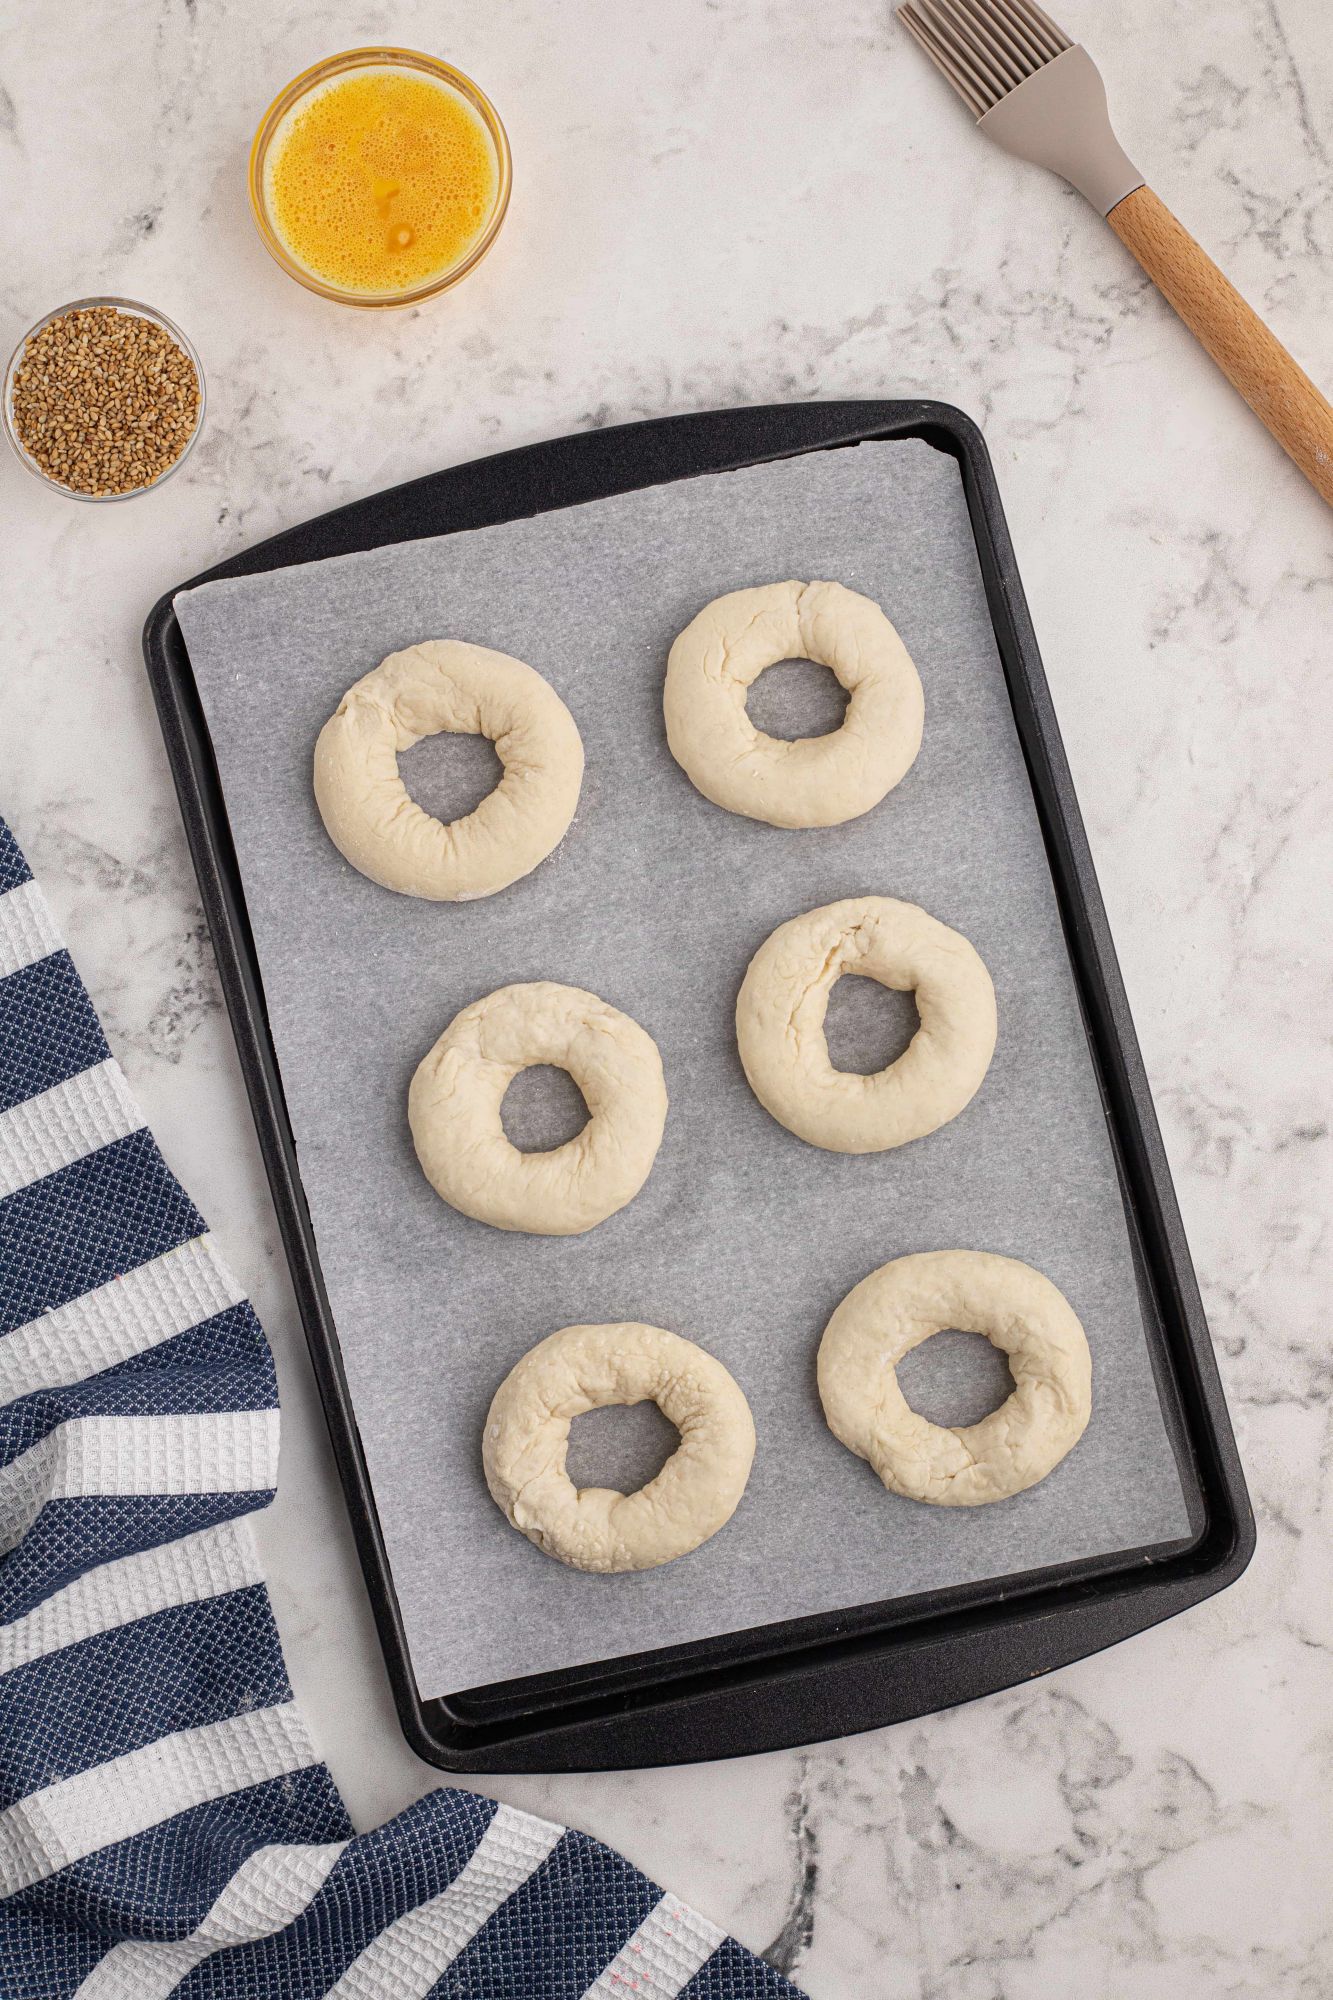 Two ingredient dough rolled into bagels on a baking sheet with parchment paper.